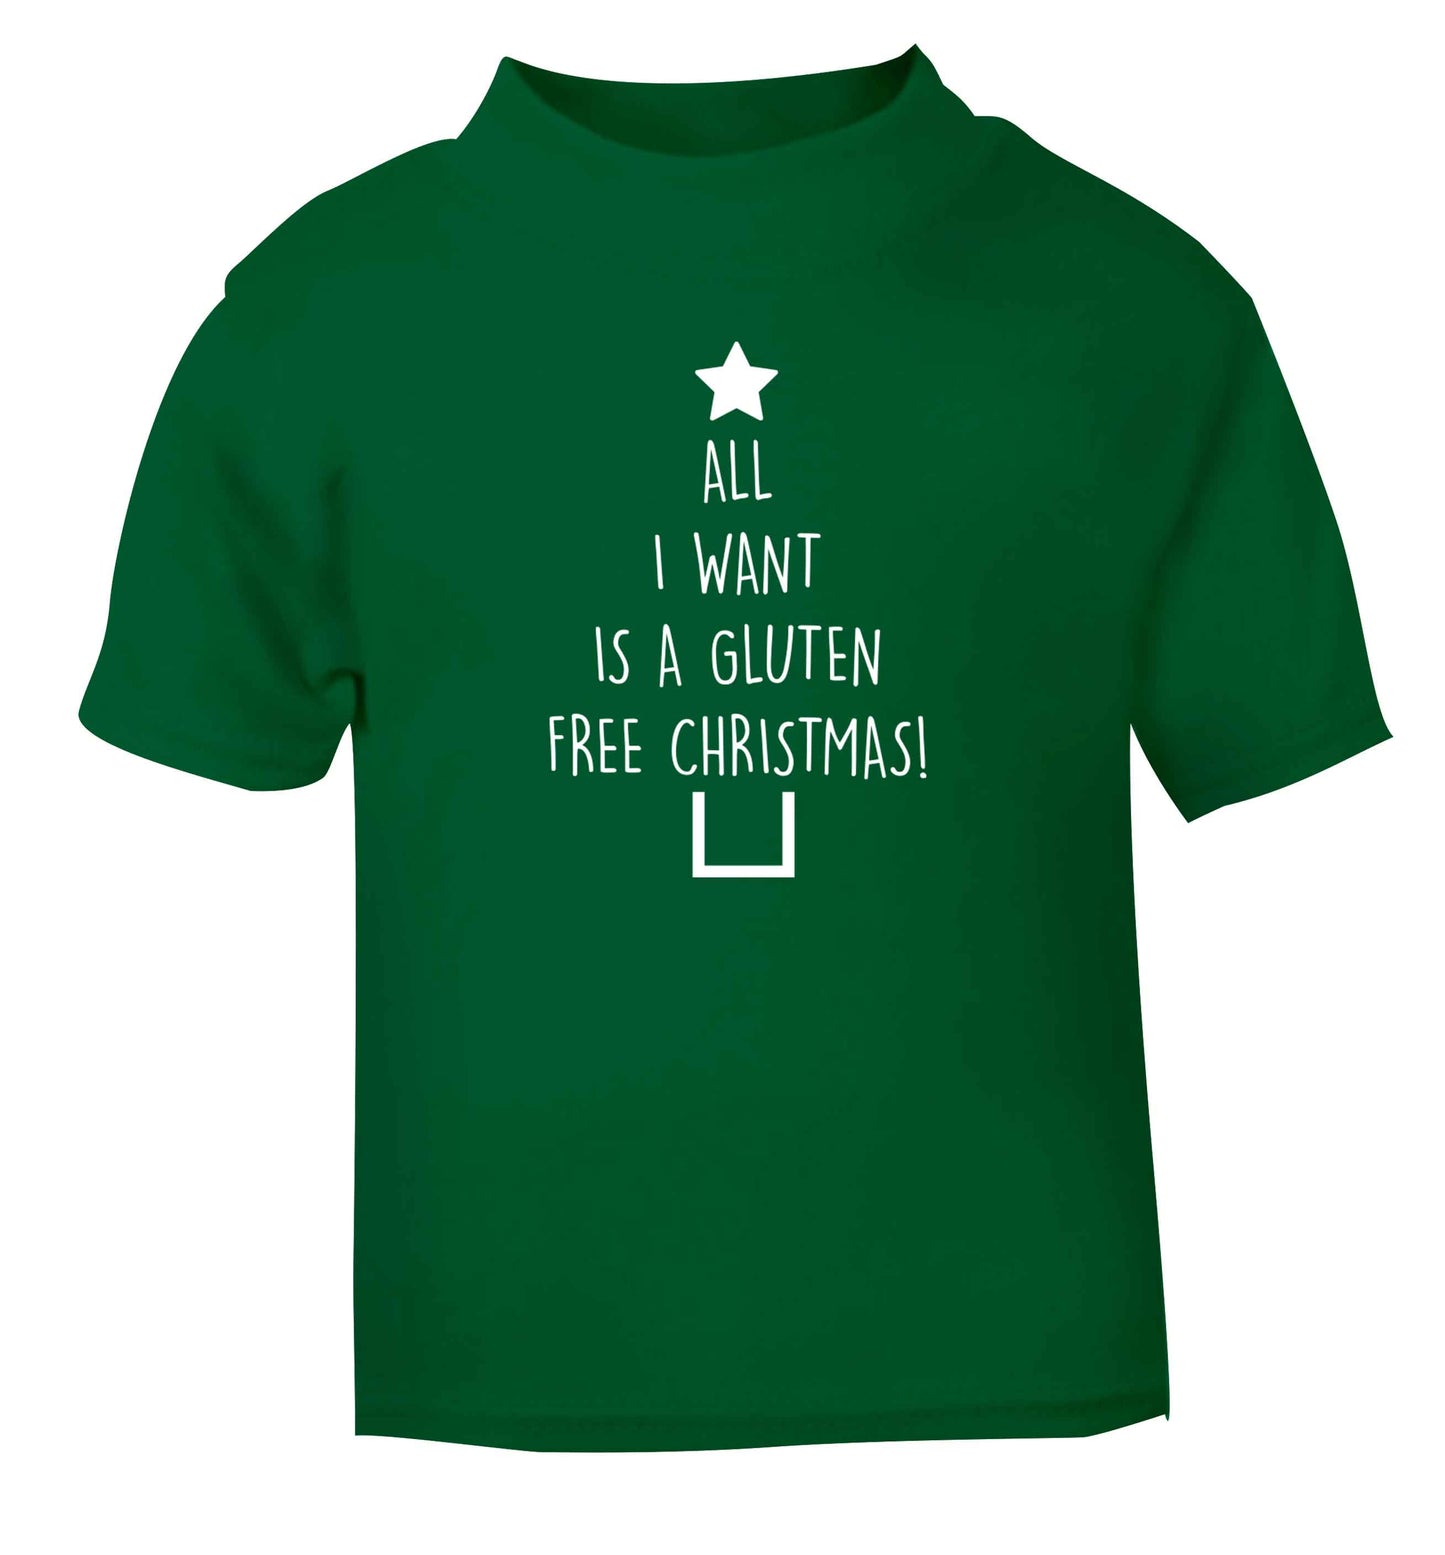 All I want is a gluten free Christmas green Baby Toddler Tshirt 2 Years